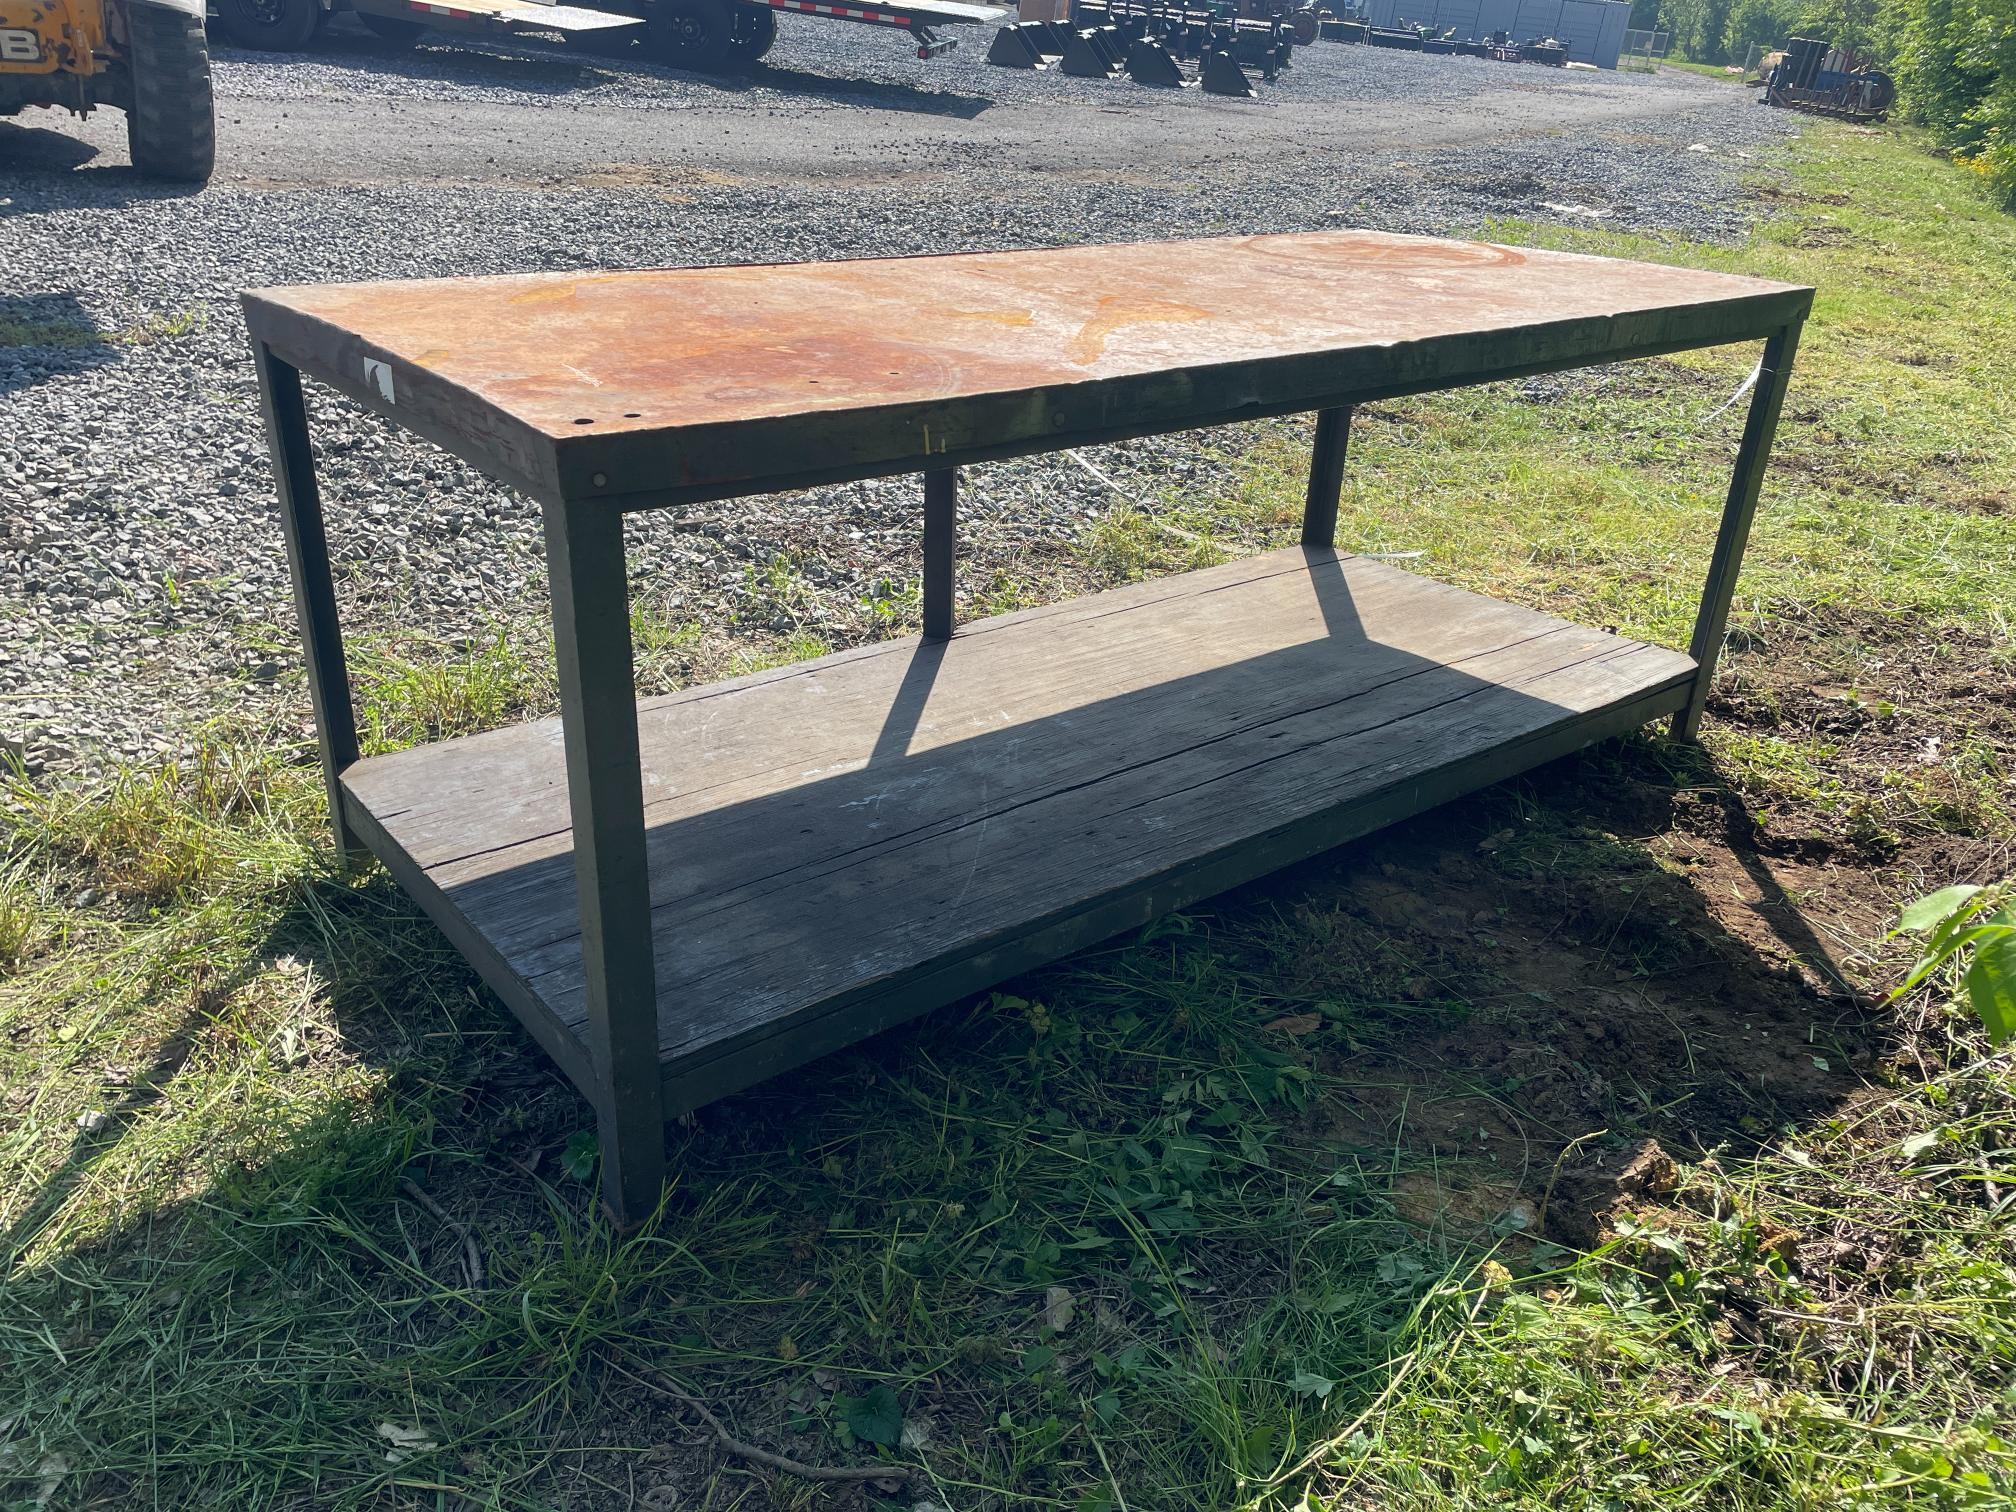 Used 3'X7' Steel Work Bench